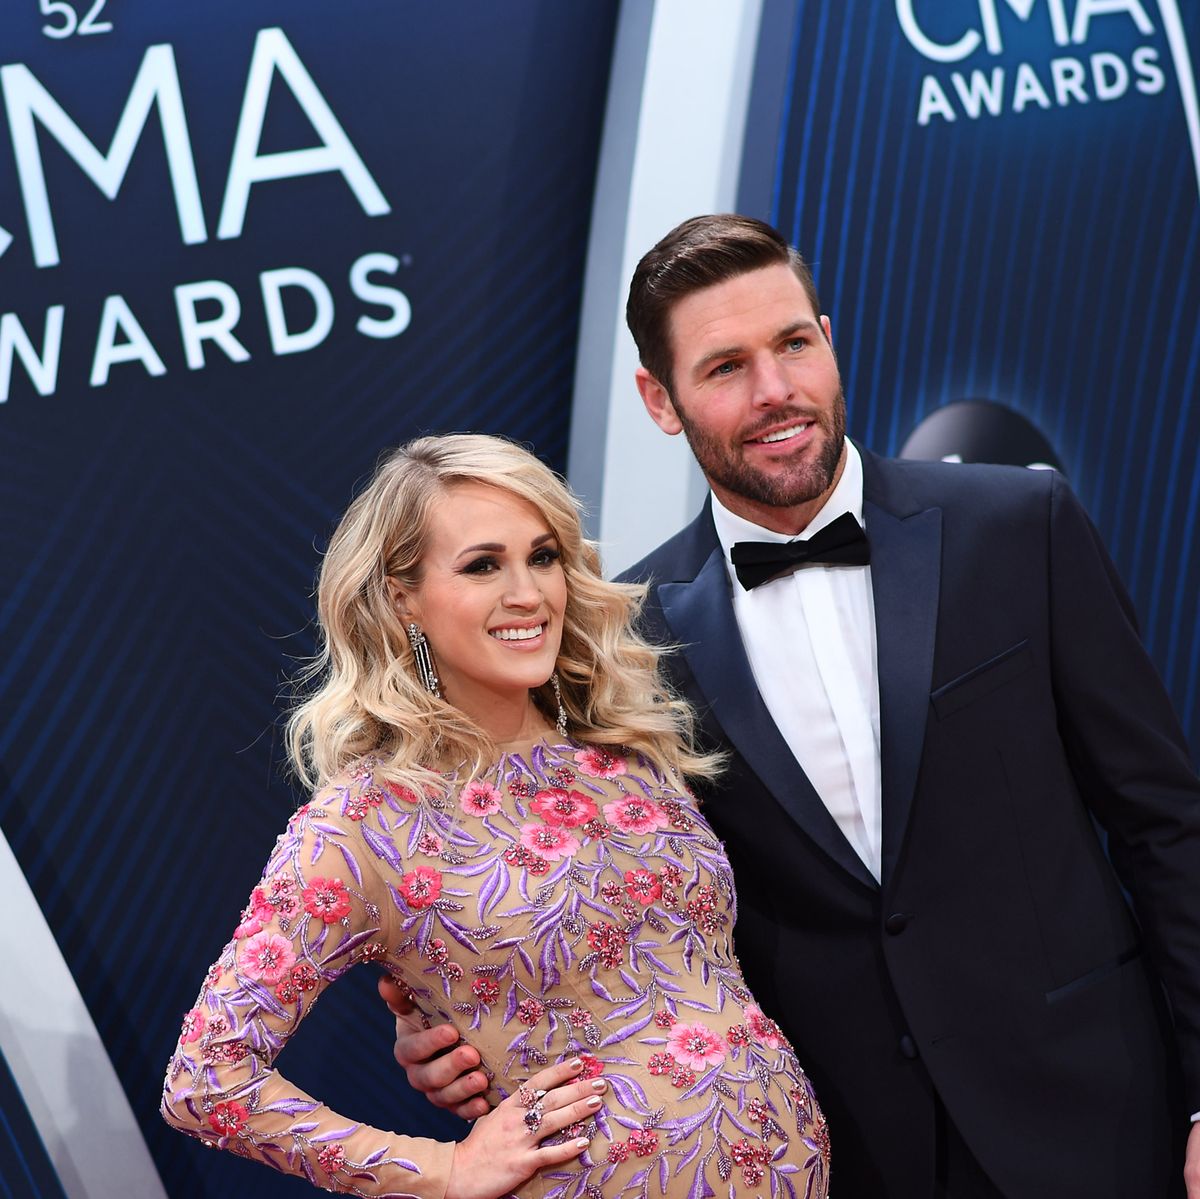 Who Is Carrie Underwood's Husband, Mike Fisher? - Inside the Country  Artist's Marriage